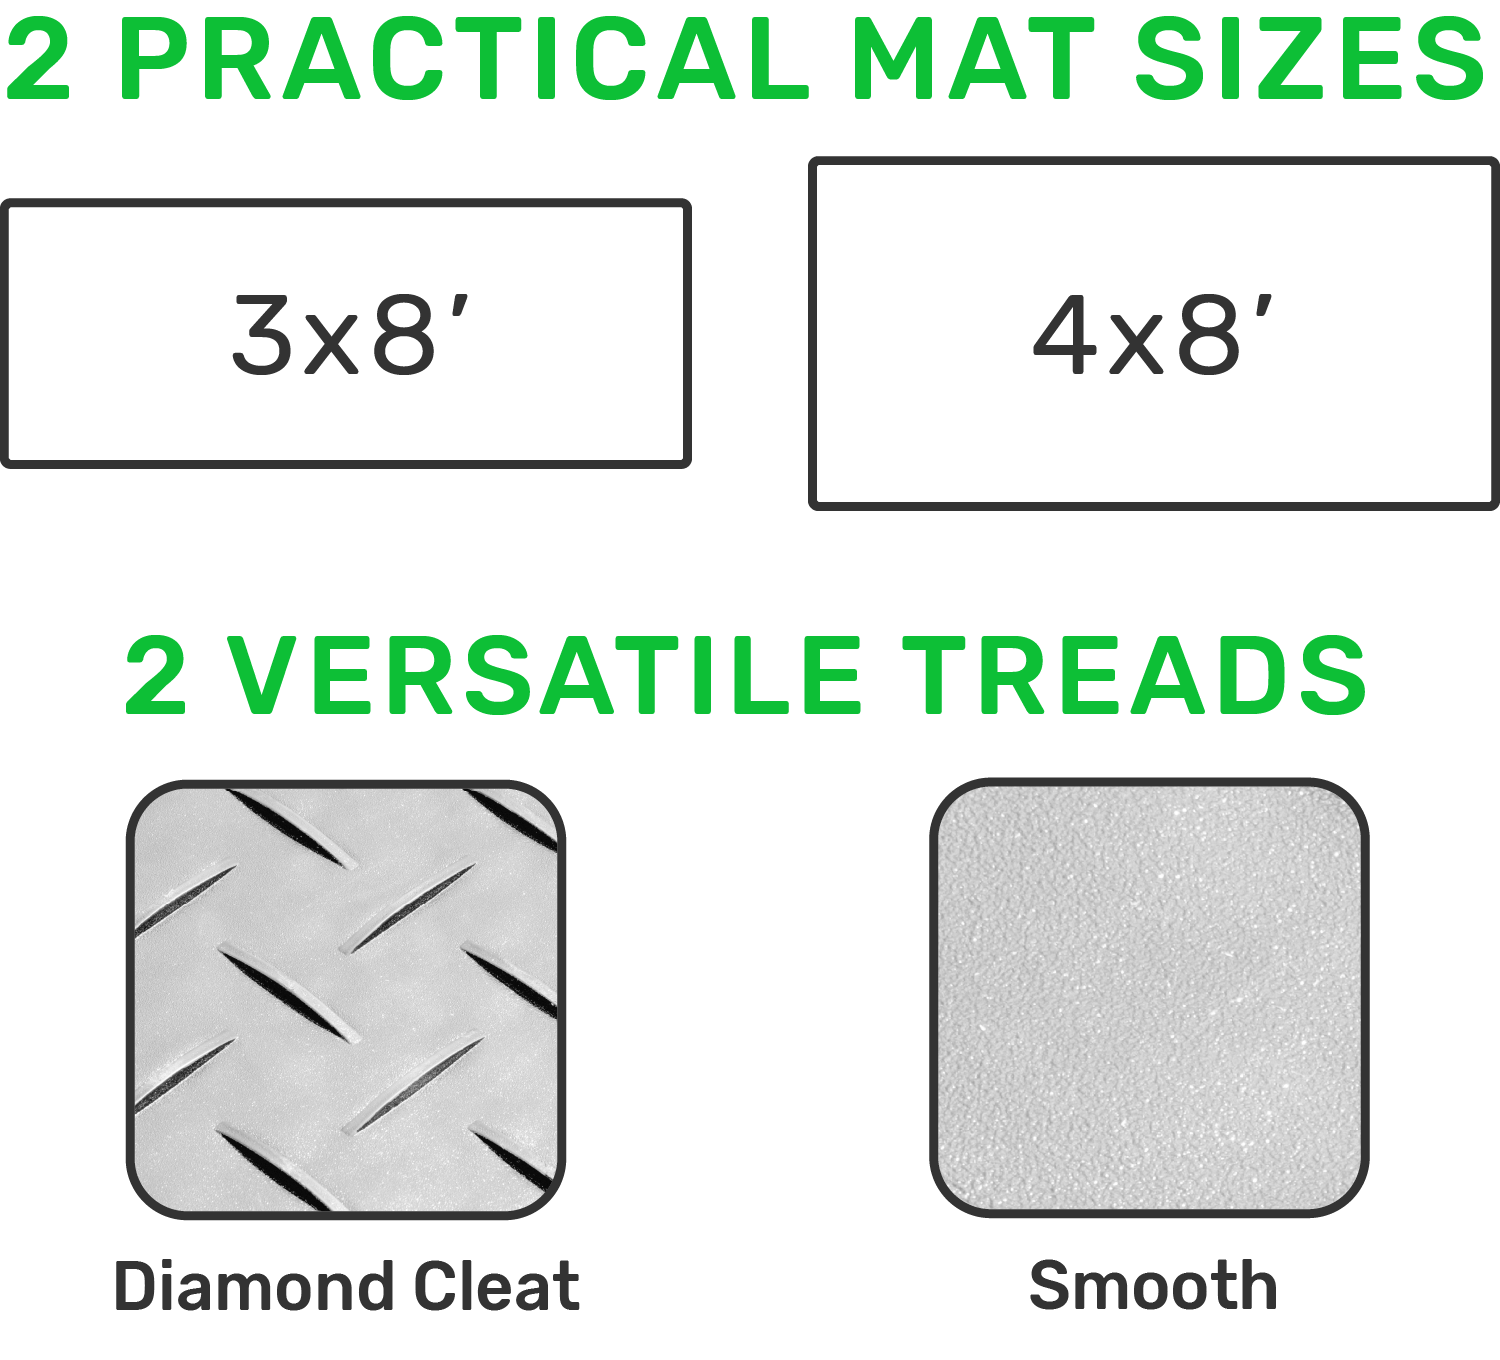 Choose between 3x8 or 4x8 ground mats with Diamond Cleat and Smooth Treads